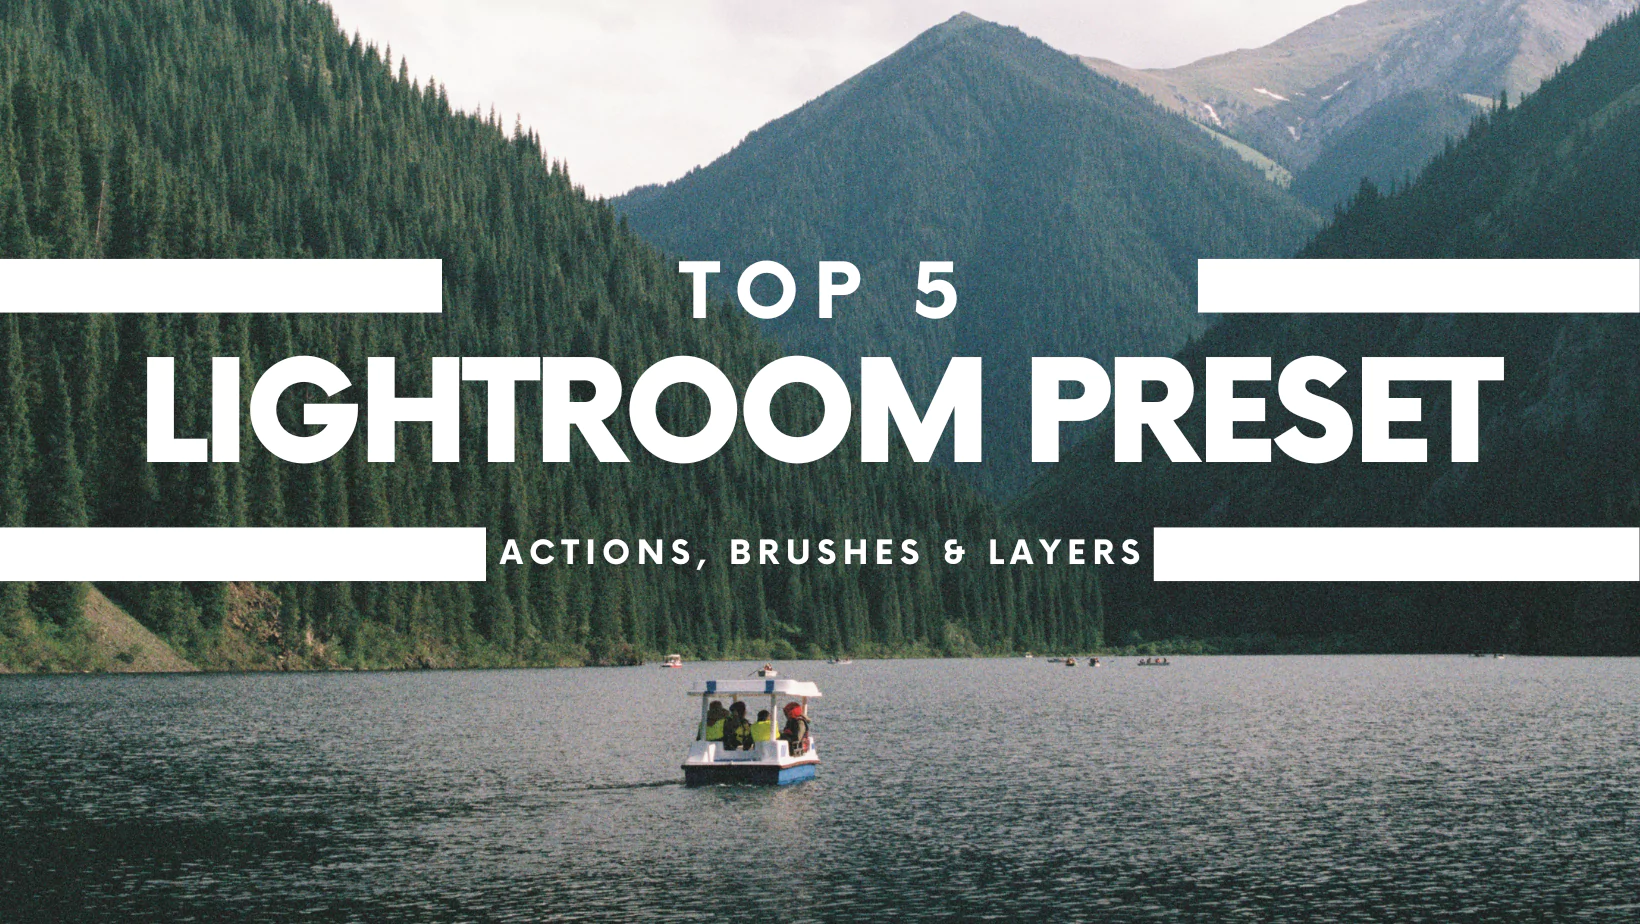 Top 5 Lightroom Preset Actions, Brushes & Layers